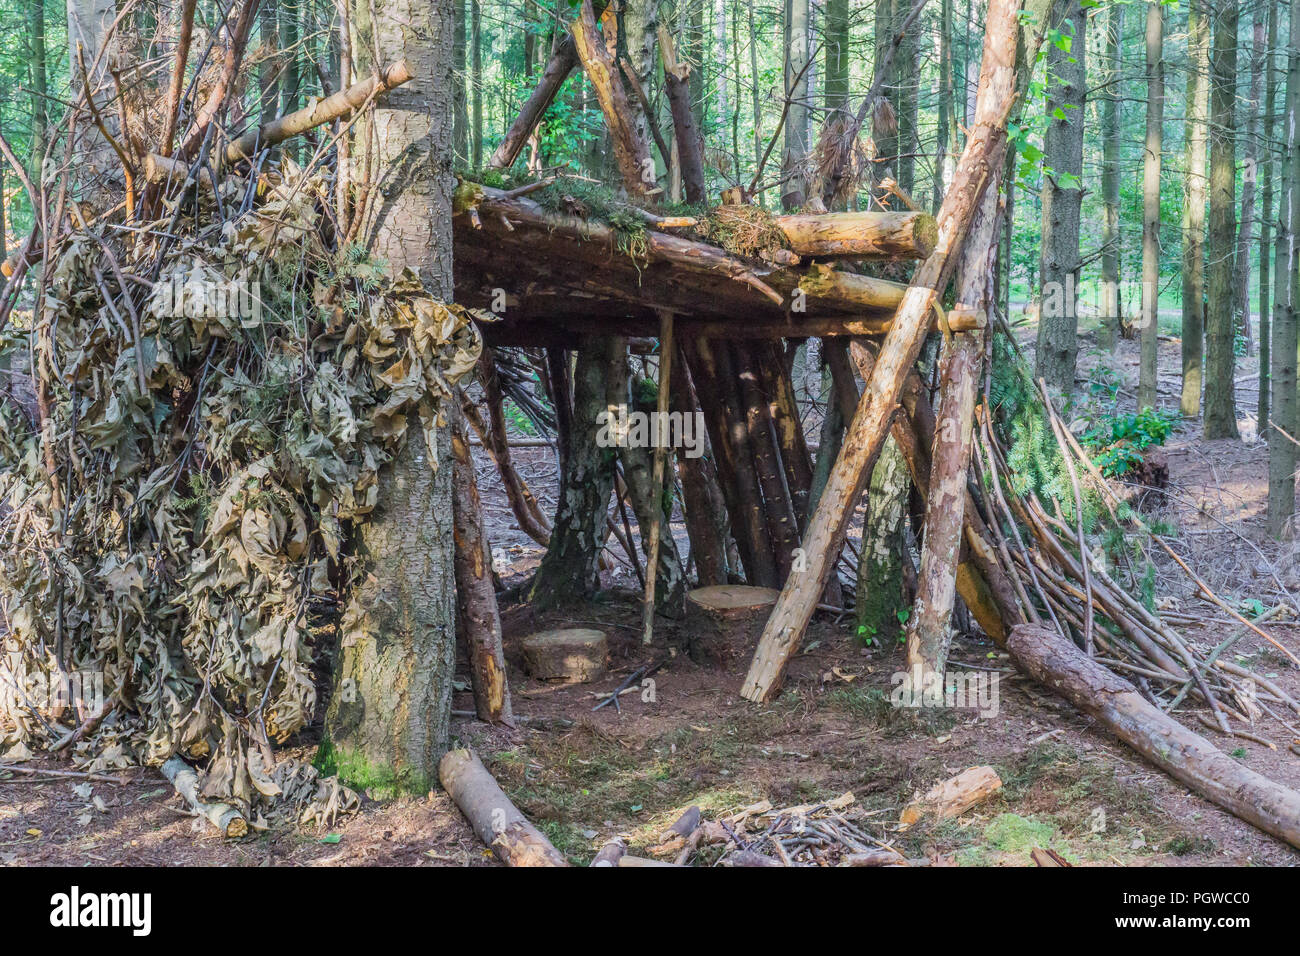 self build tree hut of branches and leaves with seats Stock Photo